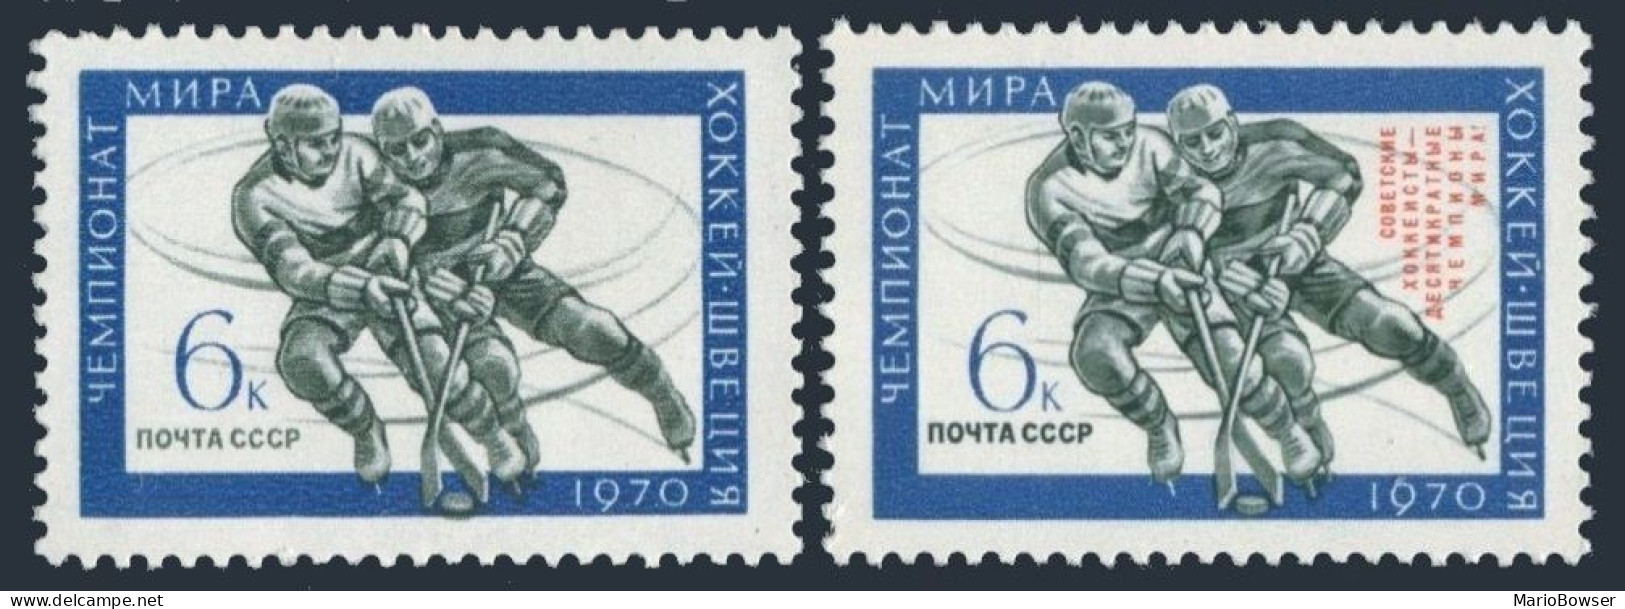 Russia 3714-3715, MNH. Michel 3740-3741. World Ice Hockey Championships, 1970. - Unused Stamps